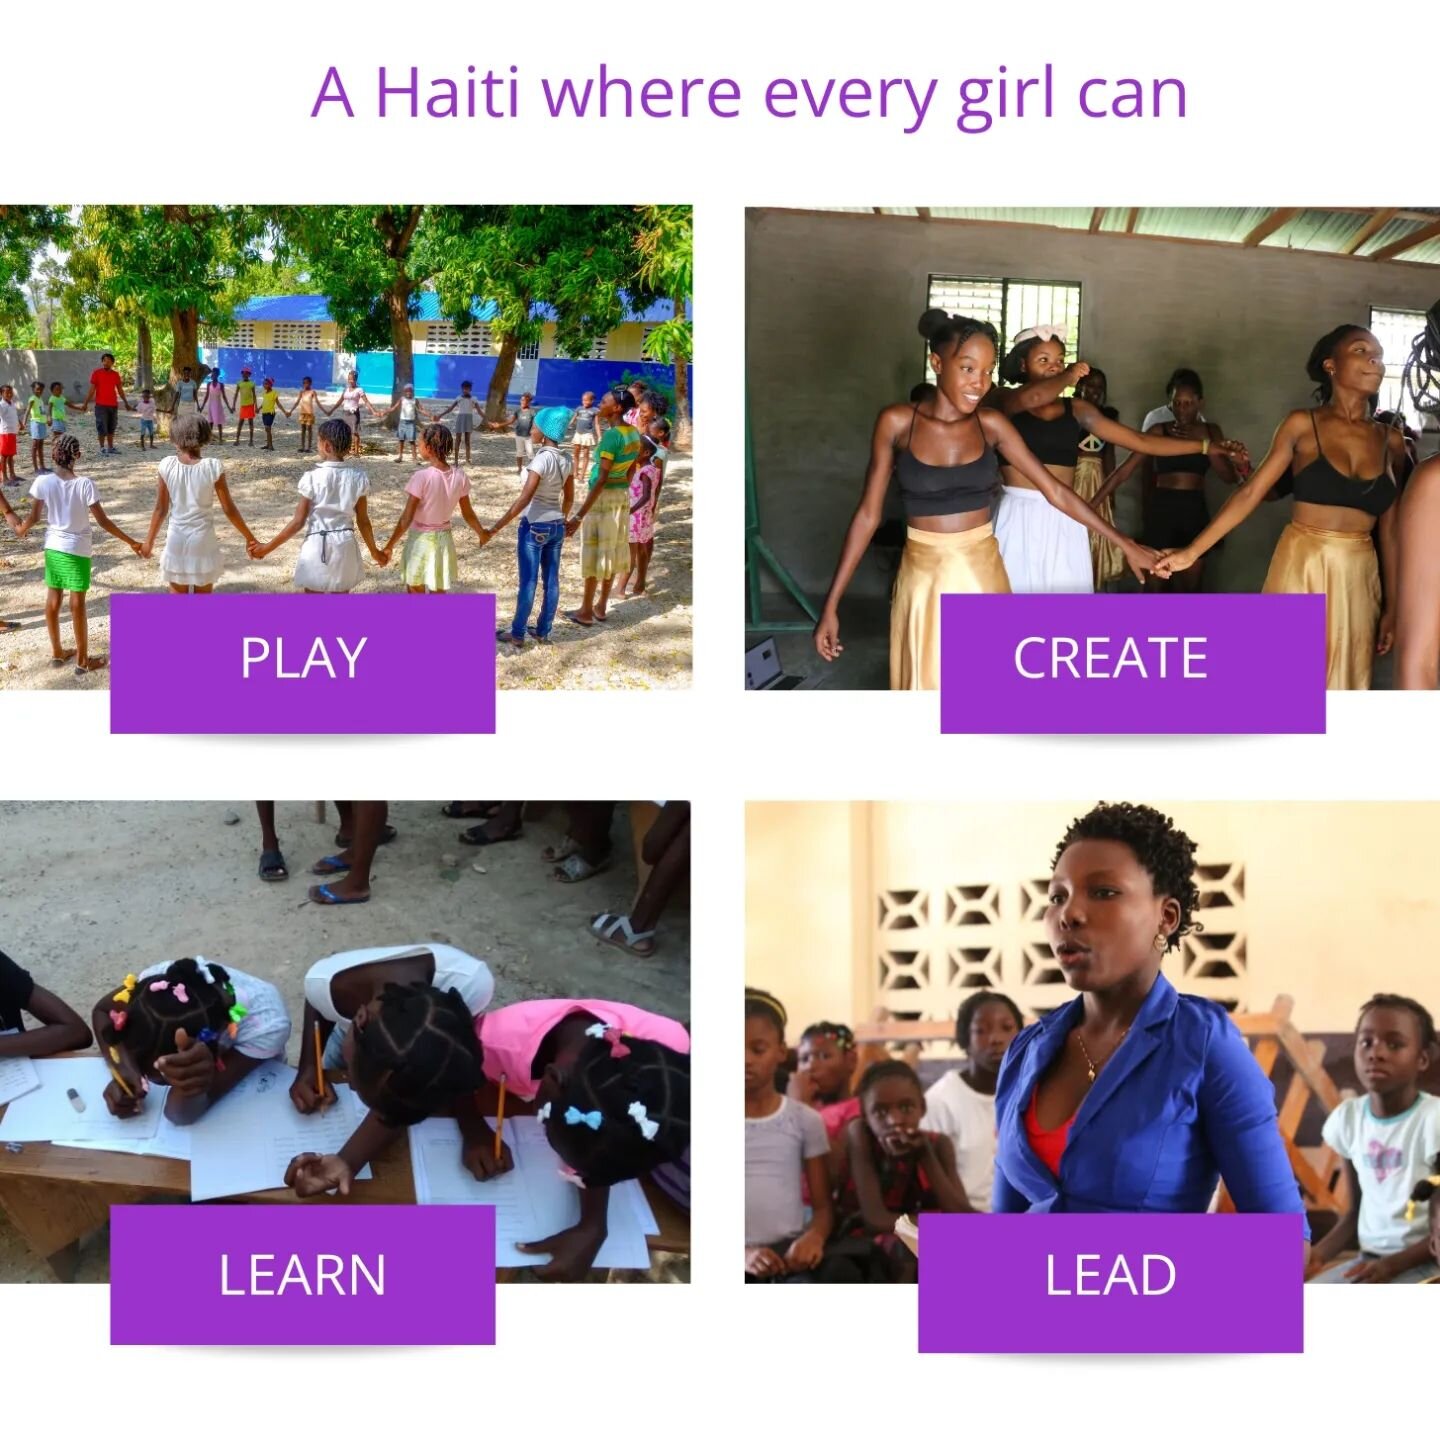 We are thrilled to share our updated vision statement with our community of supporters: A Haiti where every girl can play, create, learn, and lead. 

Our programs in the arts, education, and health support each participant to do all four. 

Tell us i